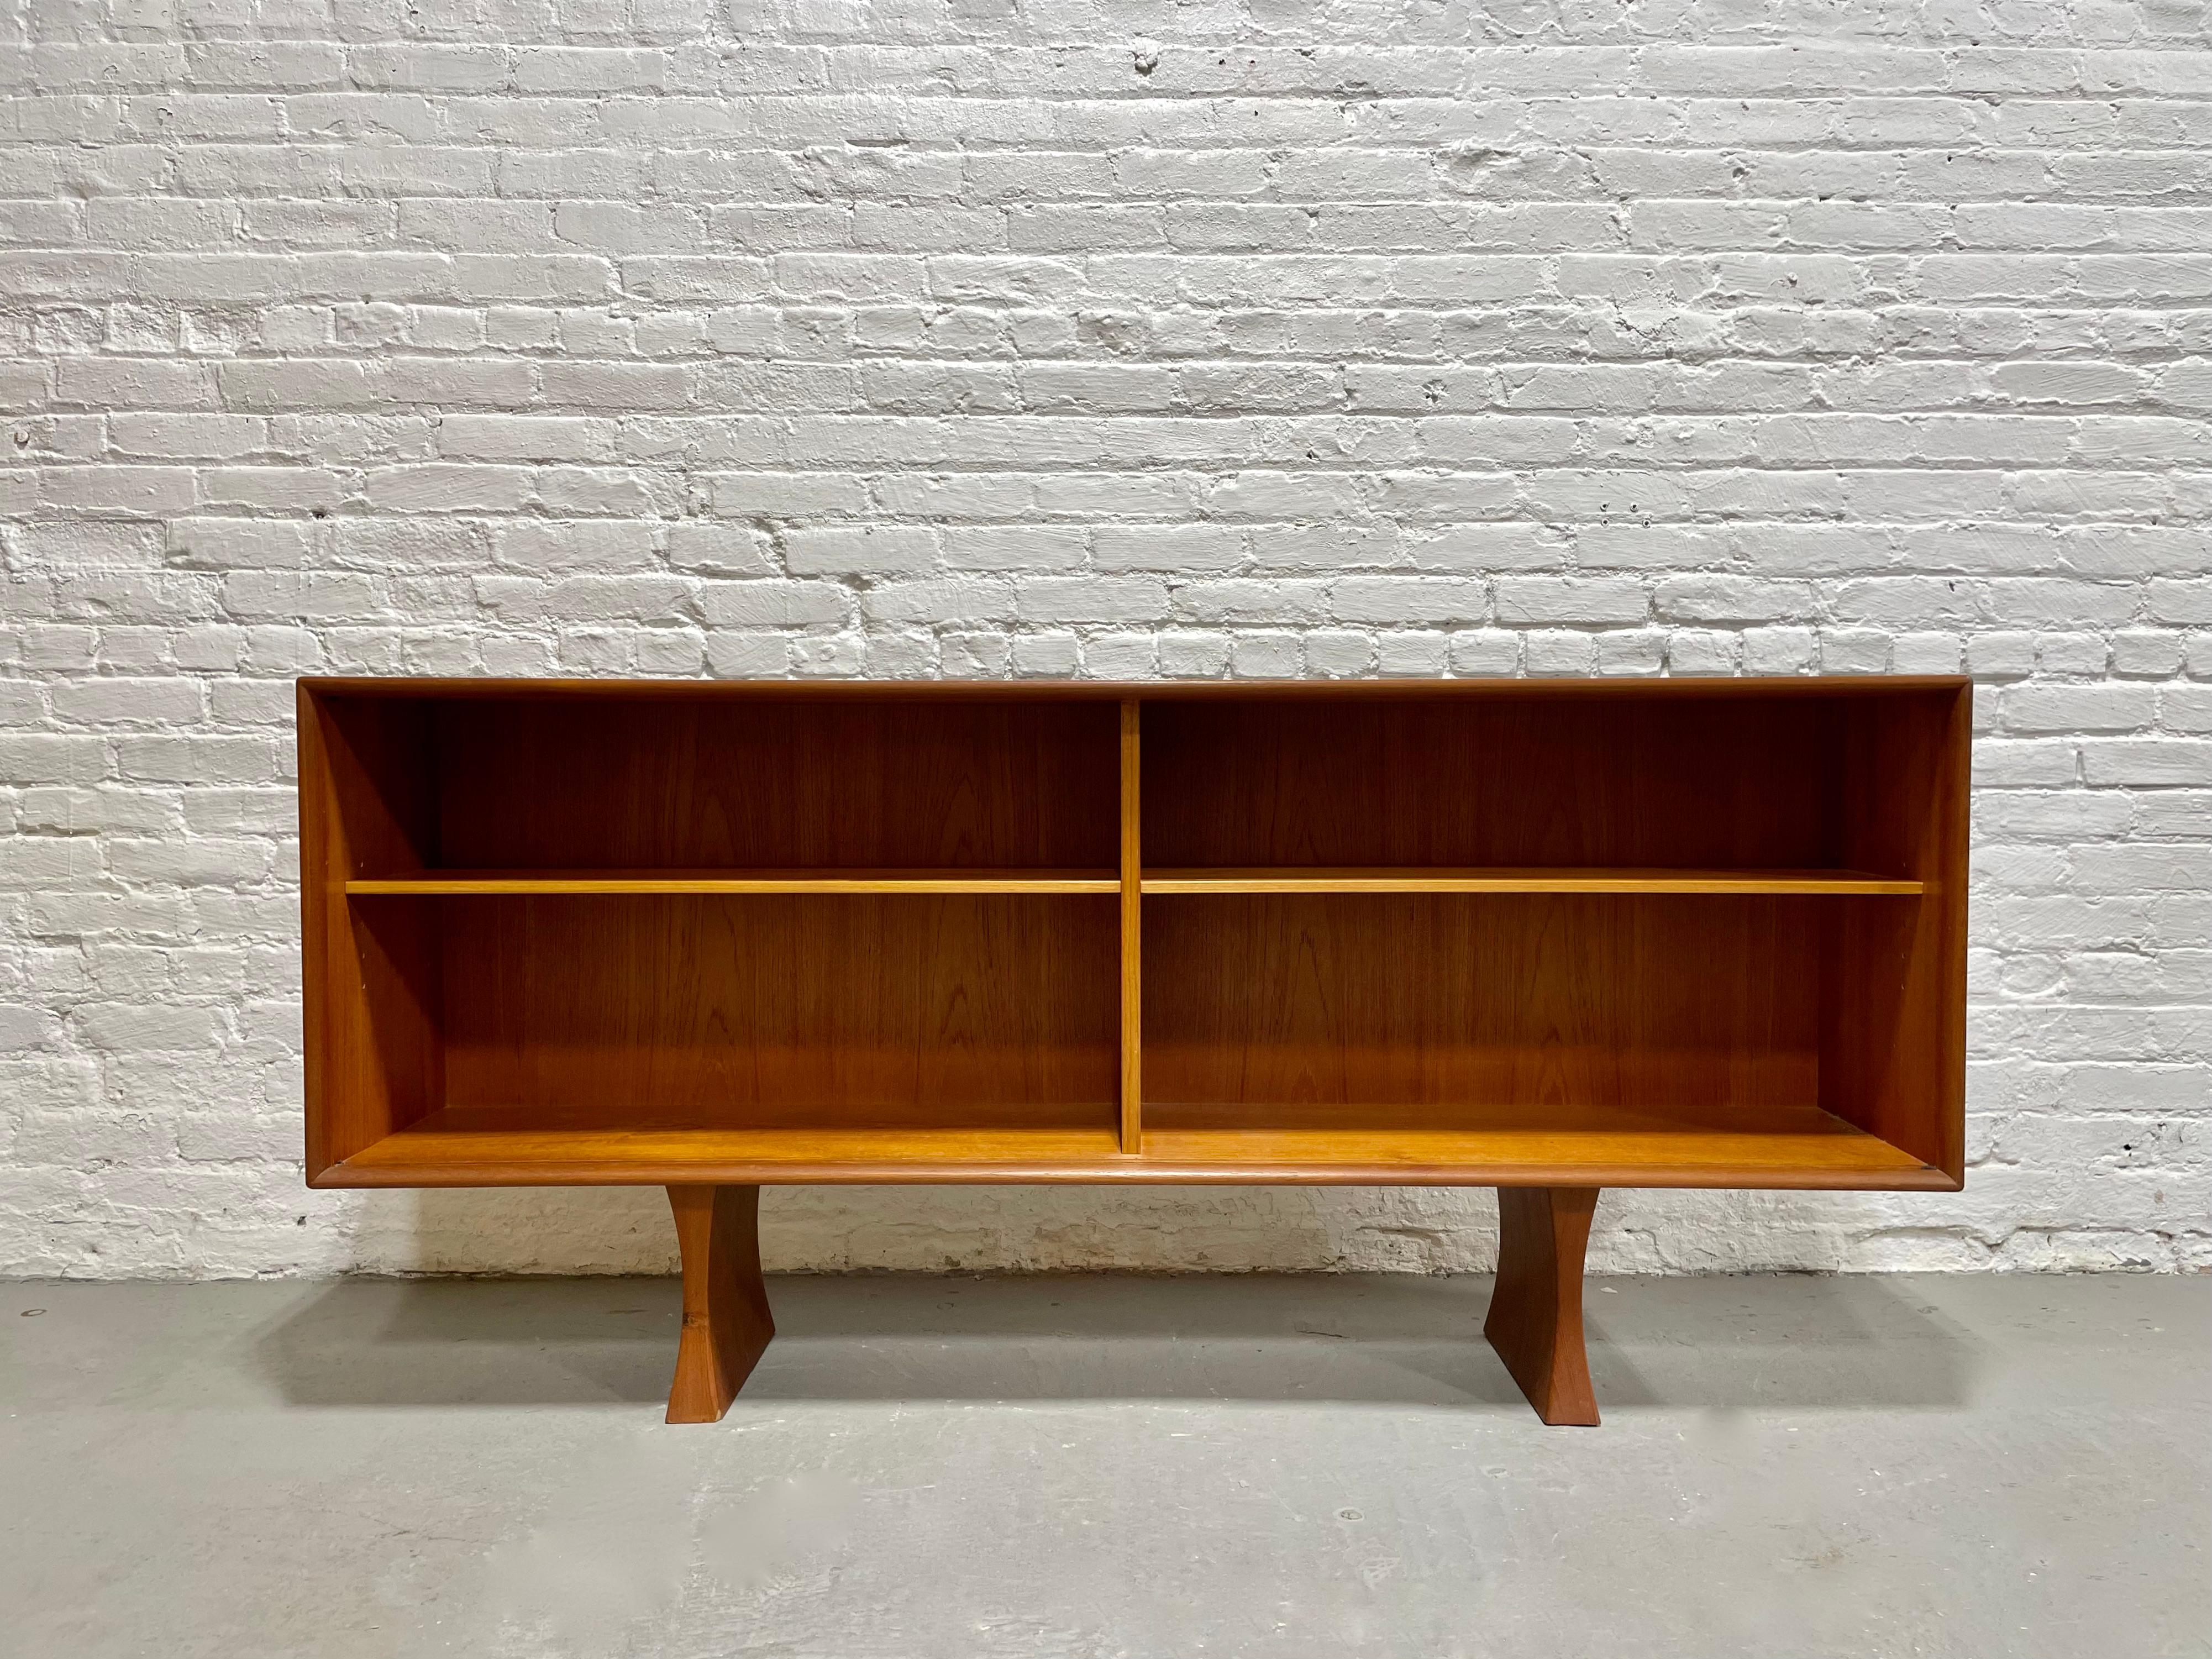 Mid Century Teak Danish Bookcase / credenza - Made in Denmark by Bernhard Pedersen. Plenty of room for books or displaying your collection; shelves are removable and adjustable. The wood grains are rich and stunning as well. Slat teak legs are solid